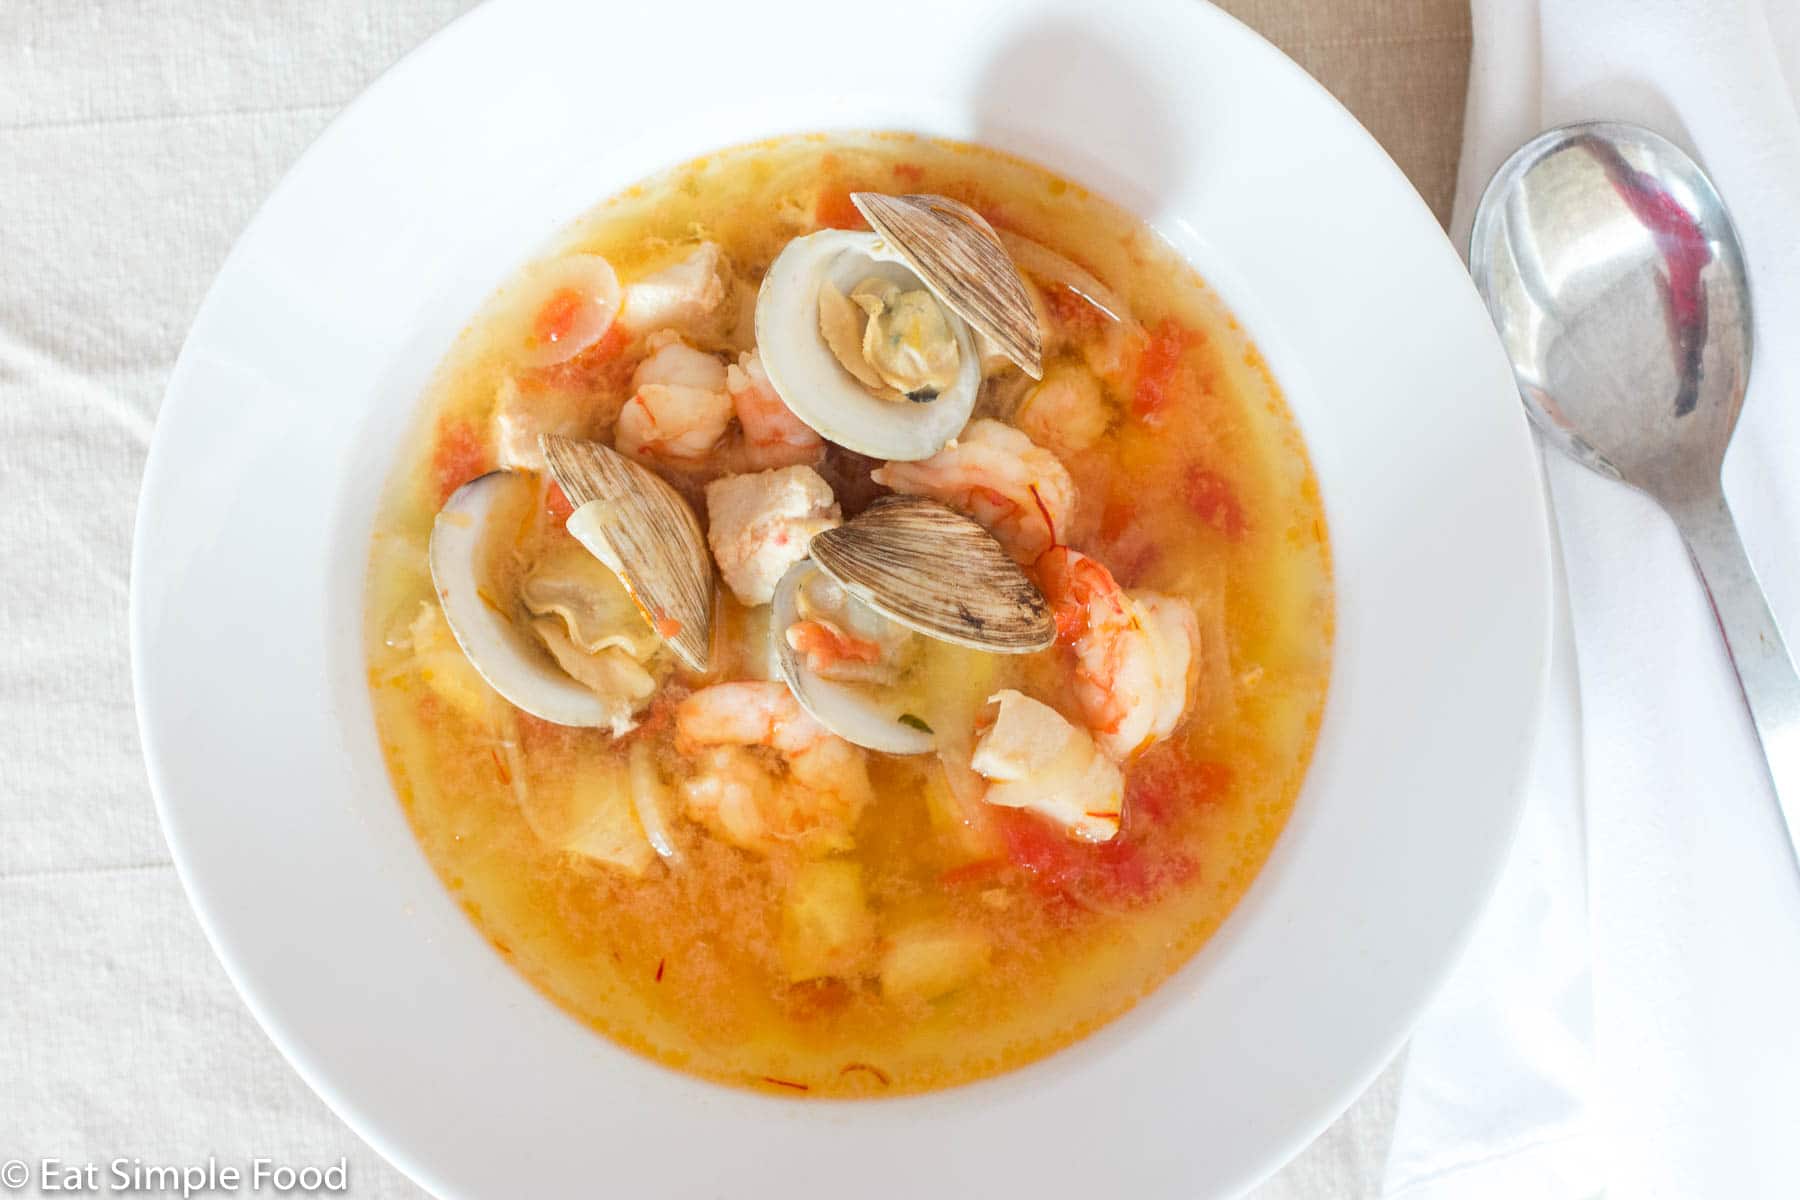 Bouillabaisse (Fish or Seafood Stew) In a white bowl with clams, shrimp, and chunks of white fish in a yellow red delicate sauce. Close up.